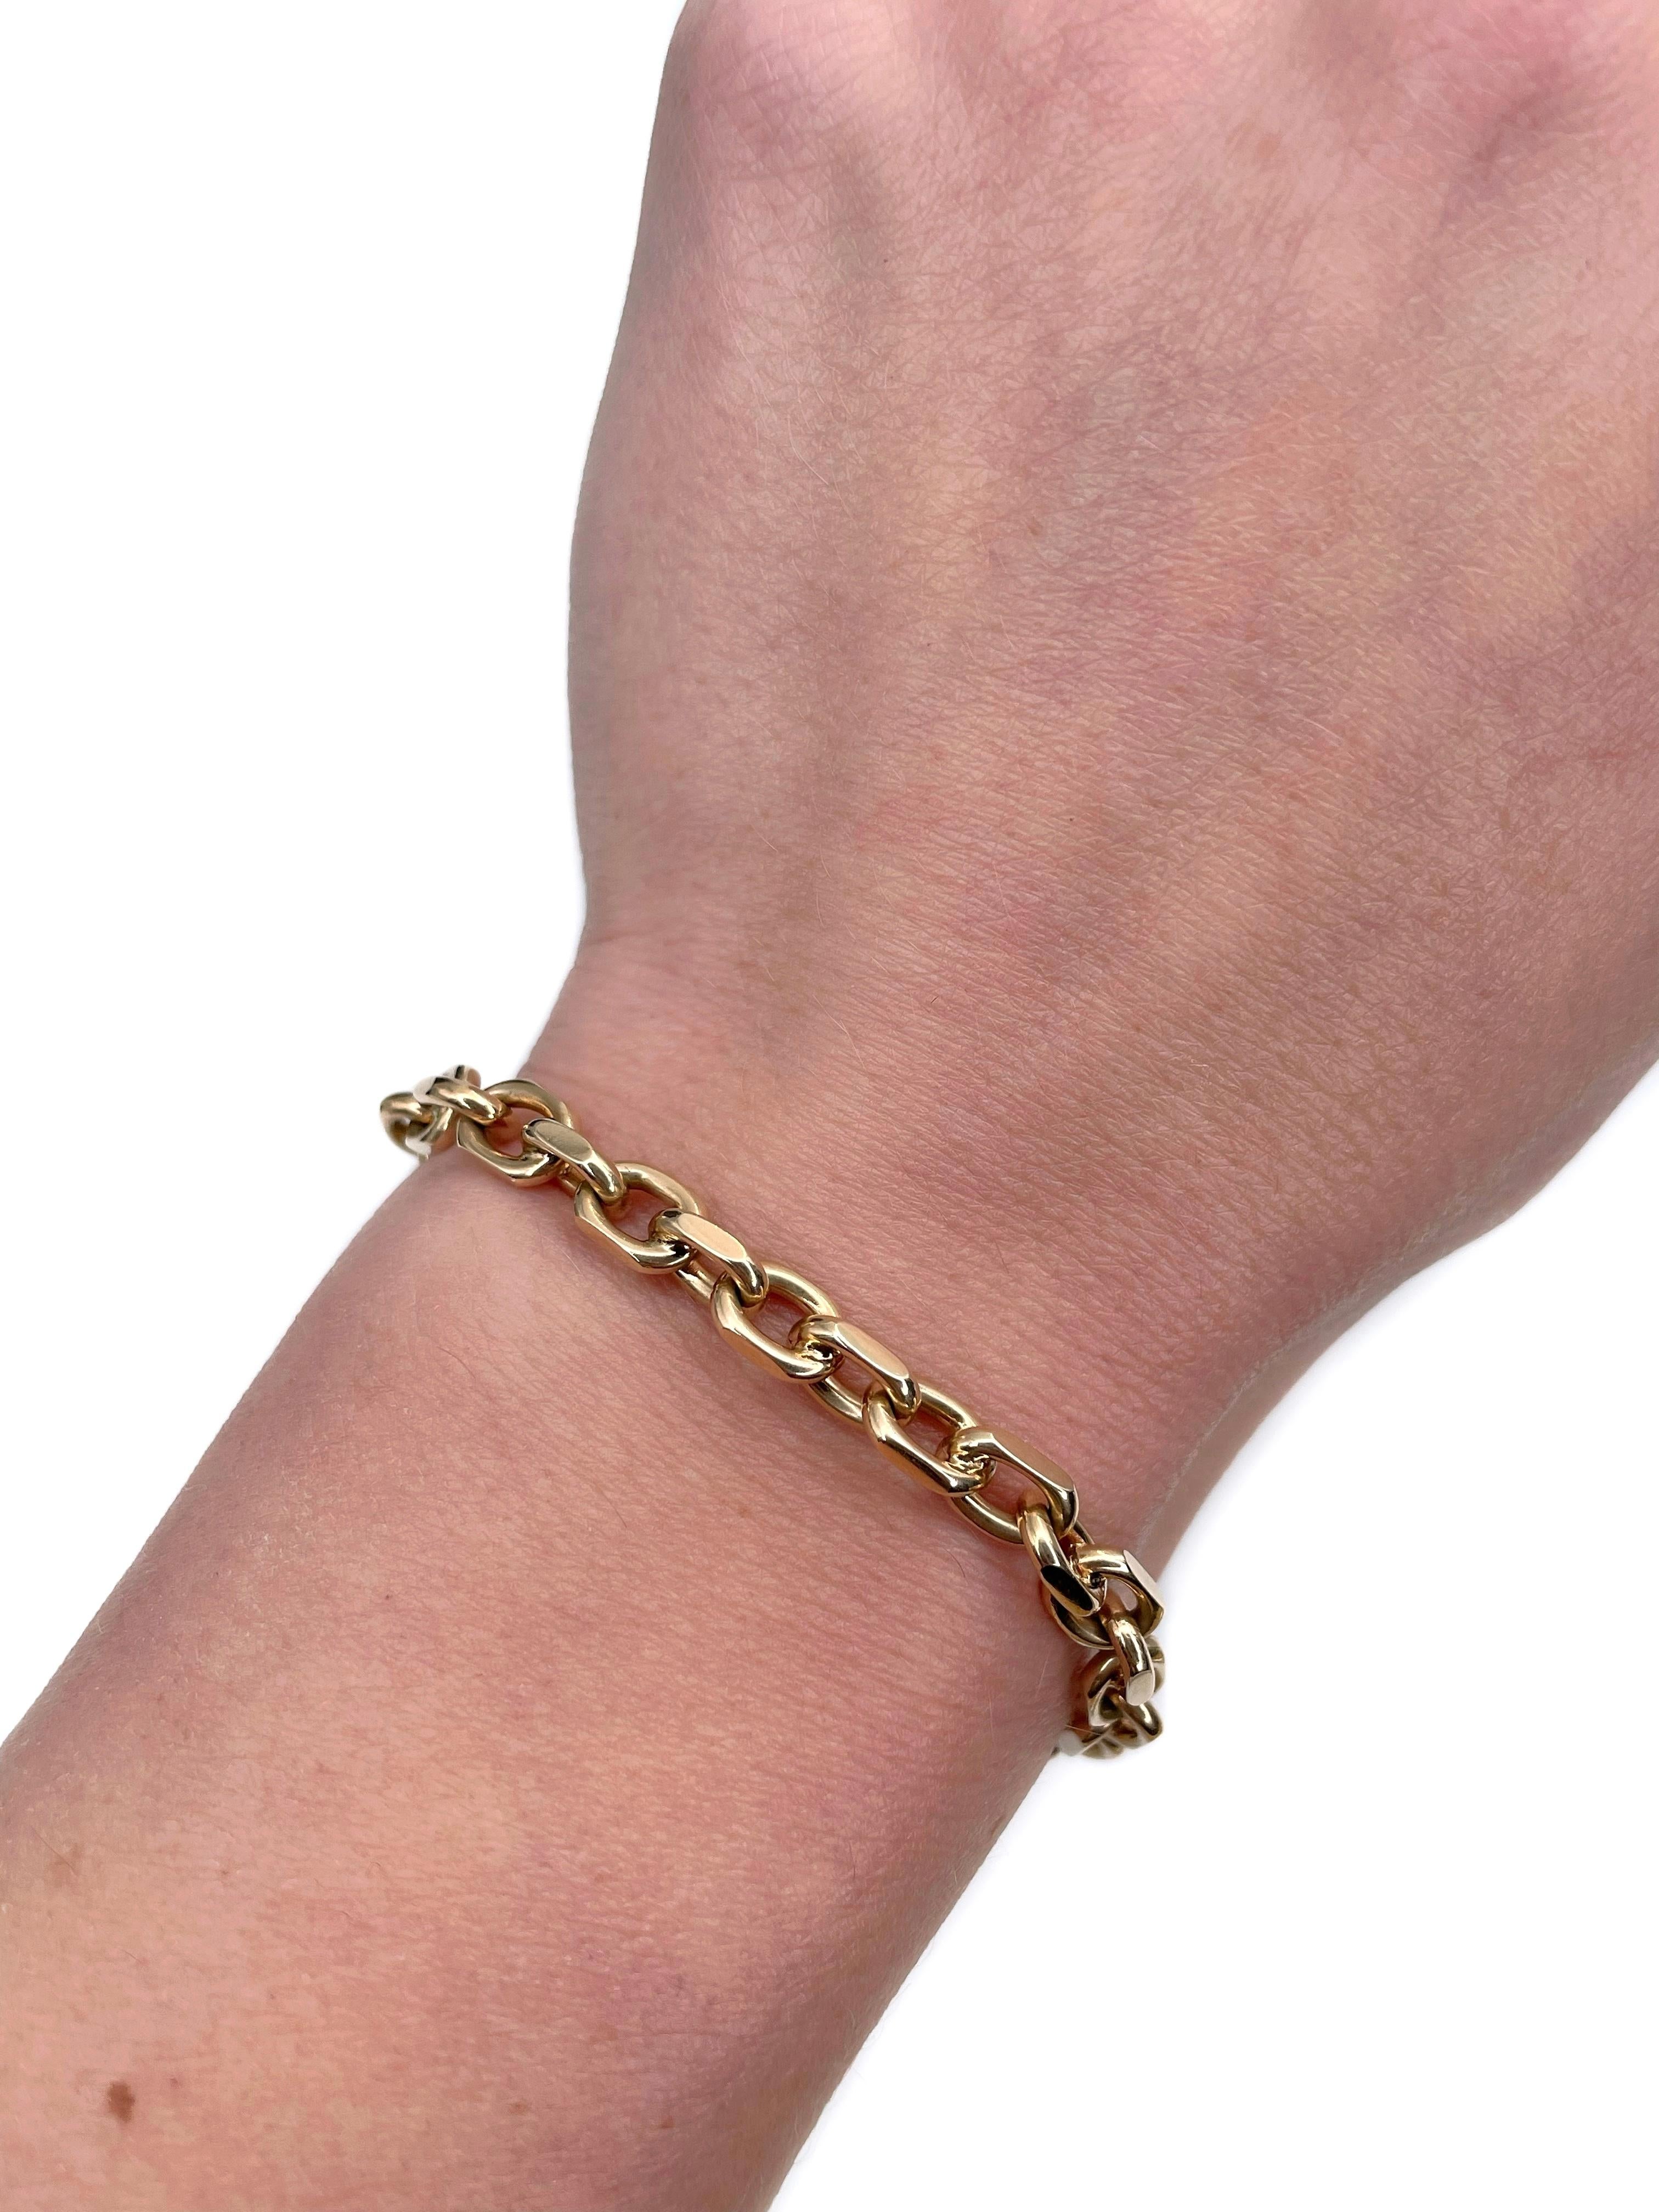 This is a vintage link chain bracelet crafted in 14K yellow gold. Circa 1980. 

The piece features safe closure.

Weight: 19.29g
Length: 19cm 

———

If you have any questions, please feel free to ask. We describe our items accurately. Please note